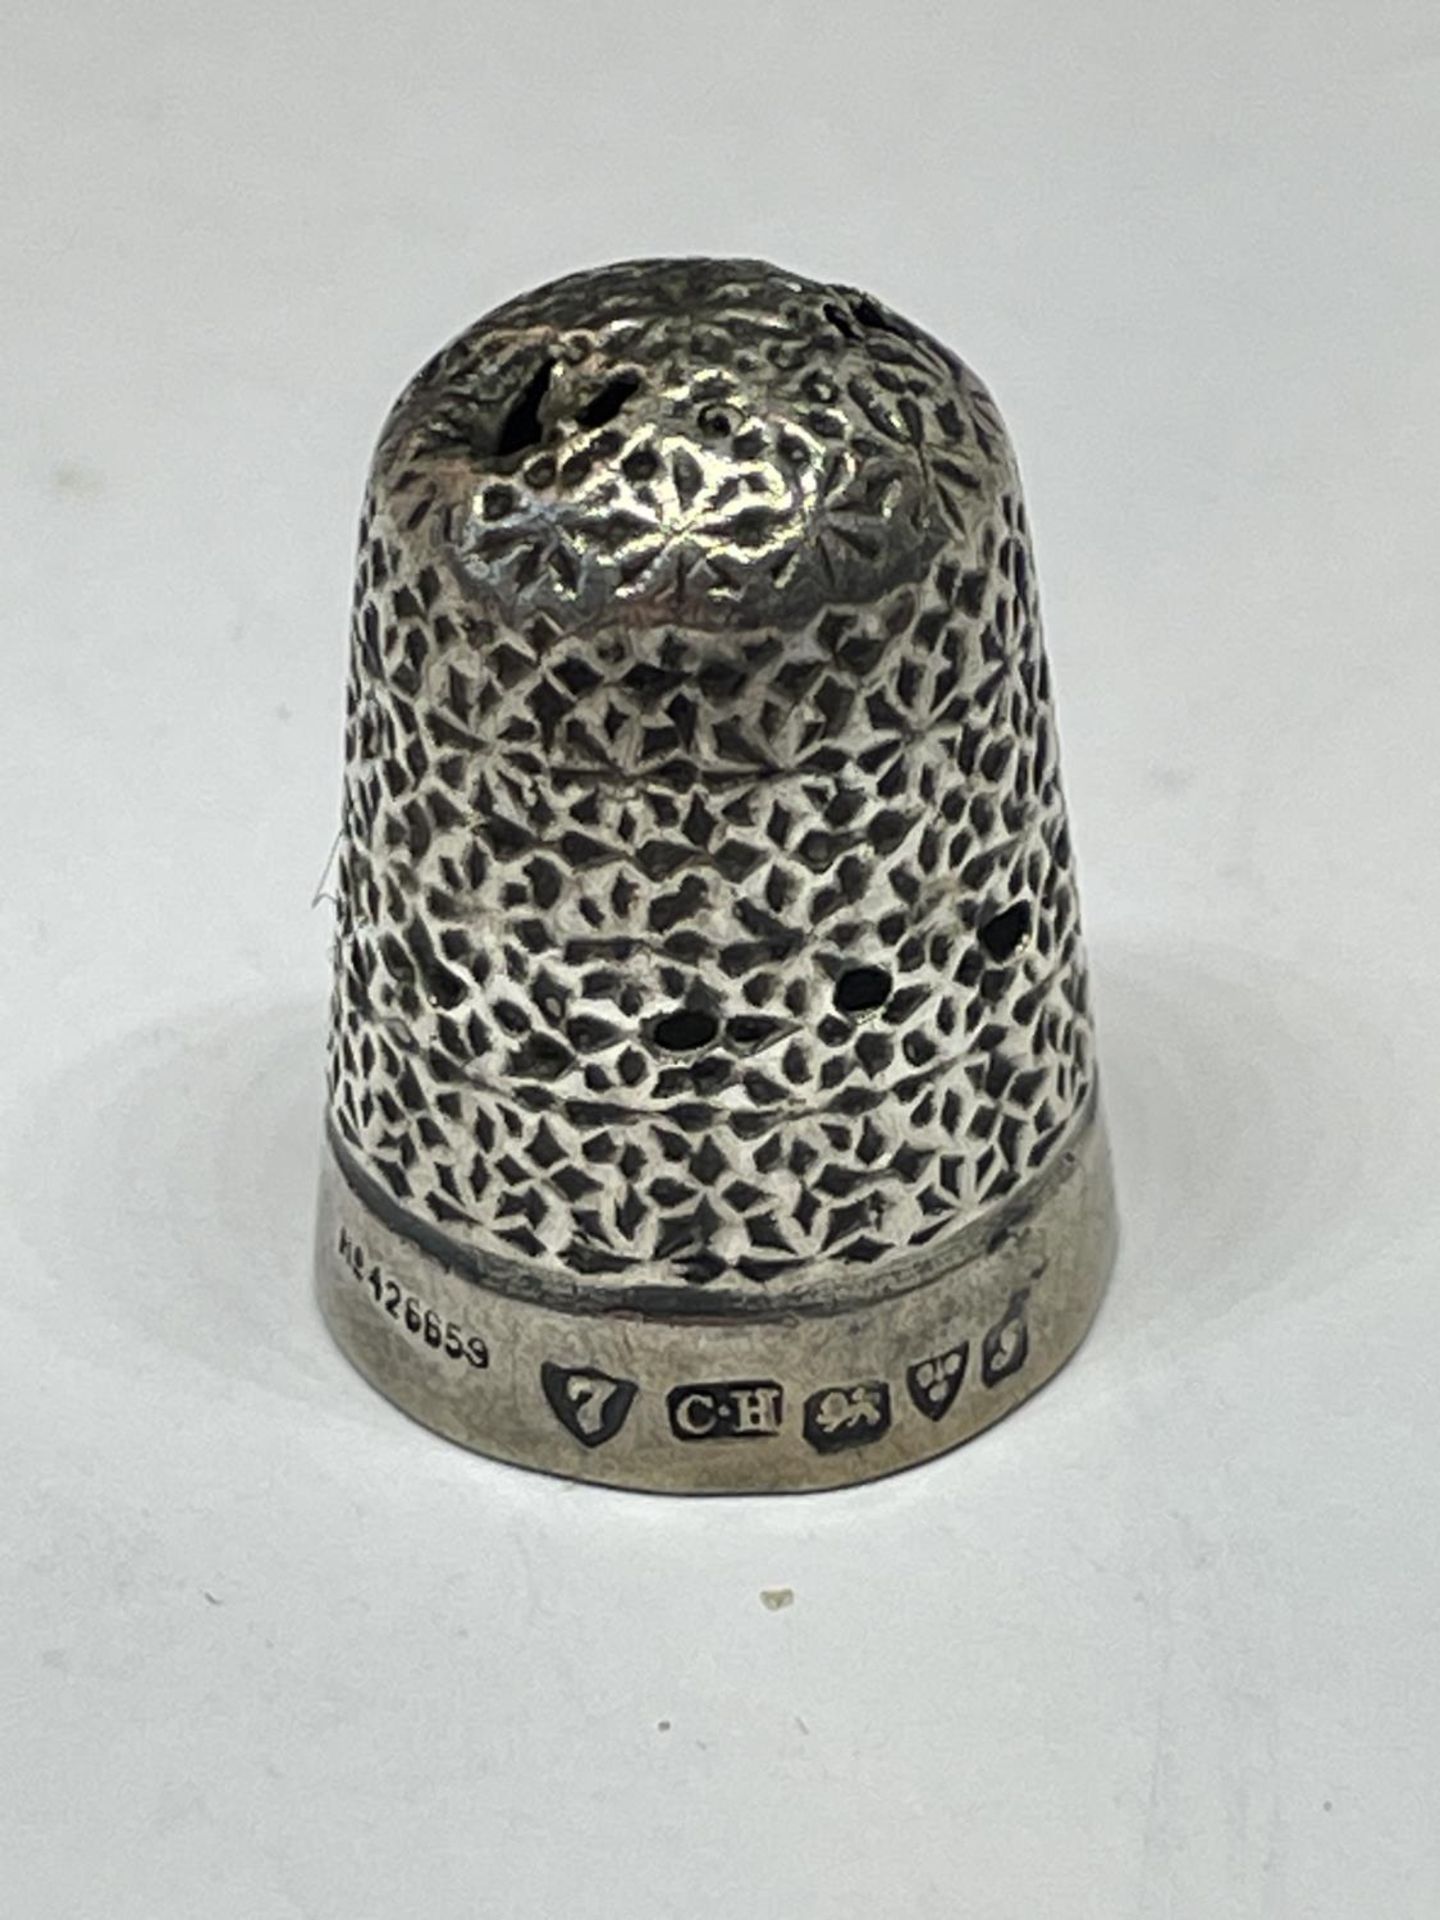 A CHARLES HORNER HALLMARKED CHESTER SILVER THIMBLE - Image 2 of 3